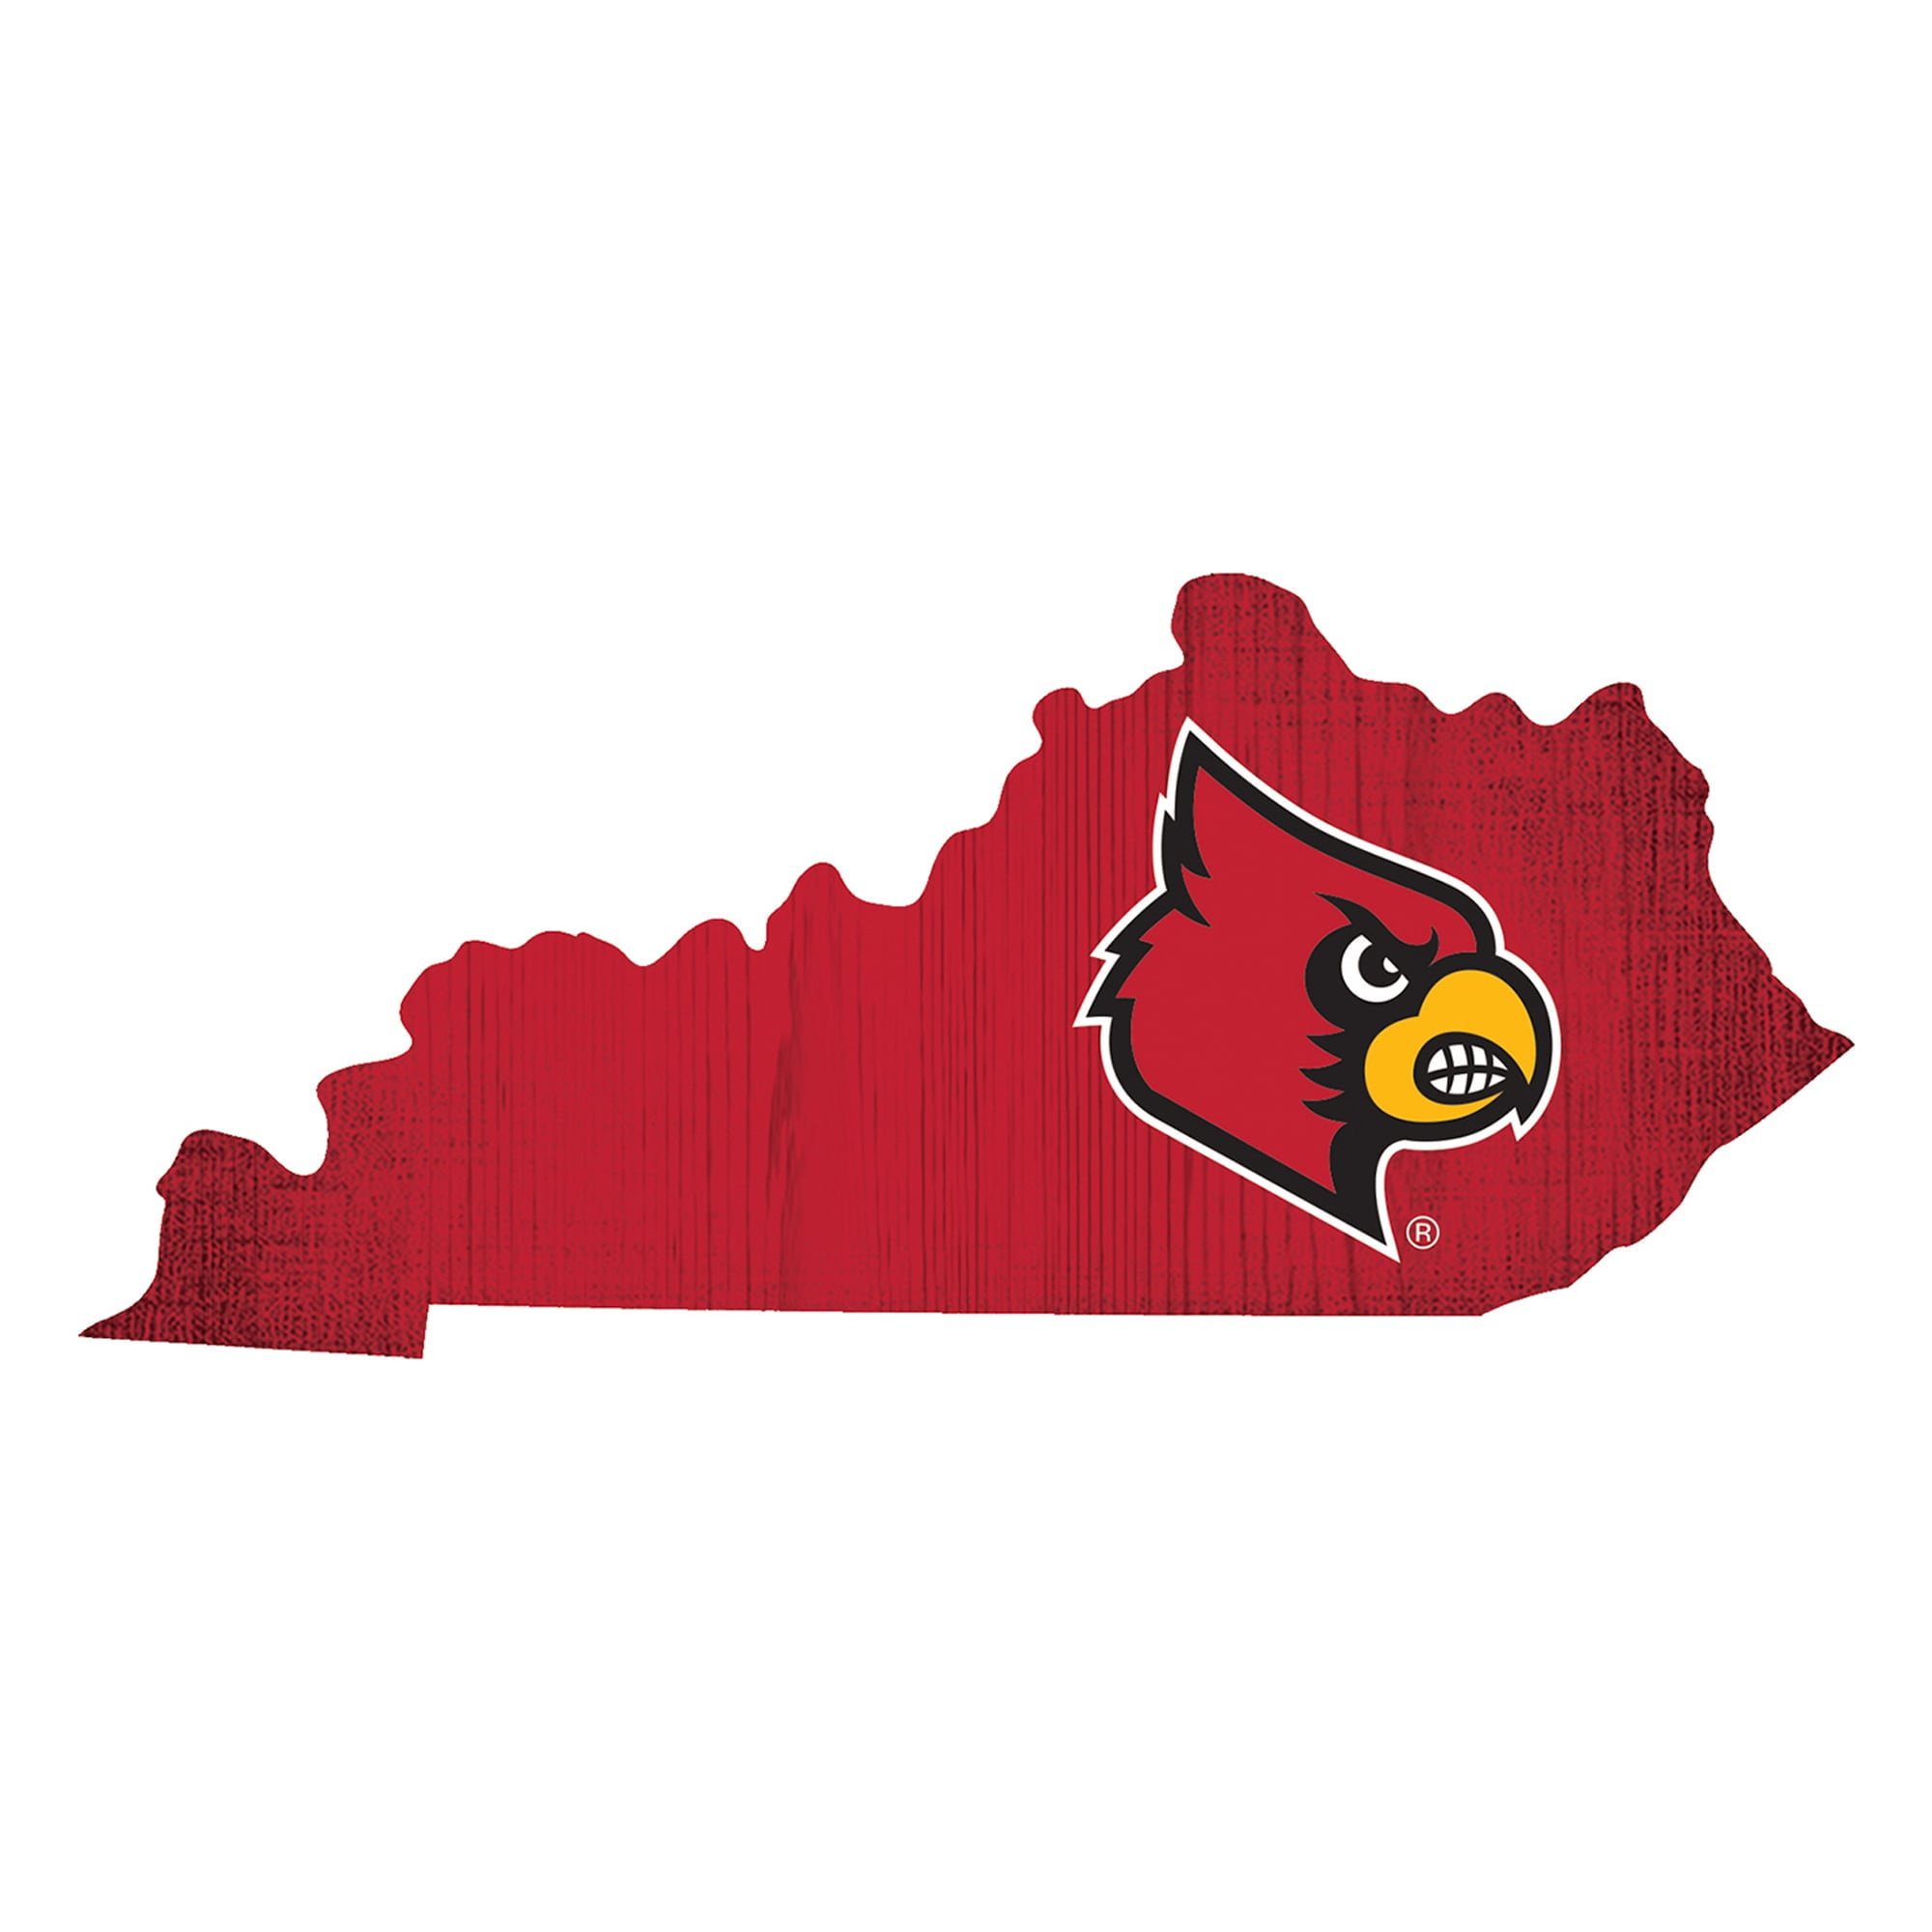 Louisville Cardinals 12 Welcome Circle Sign